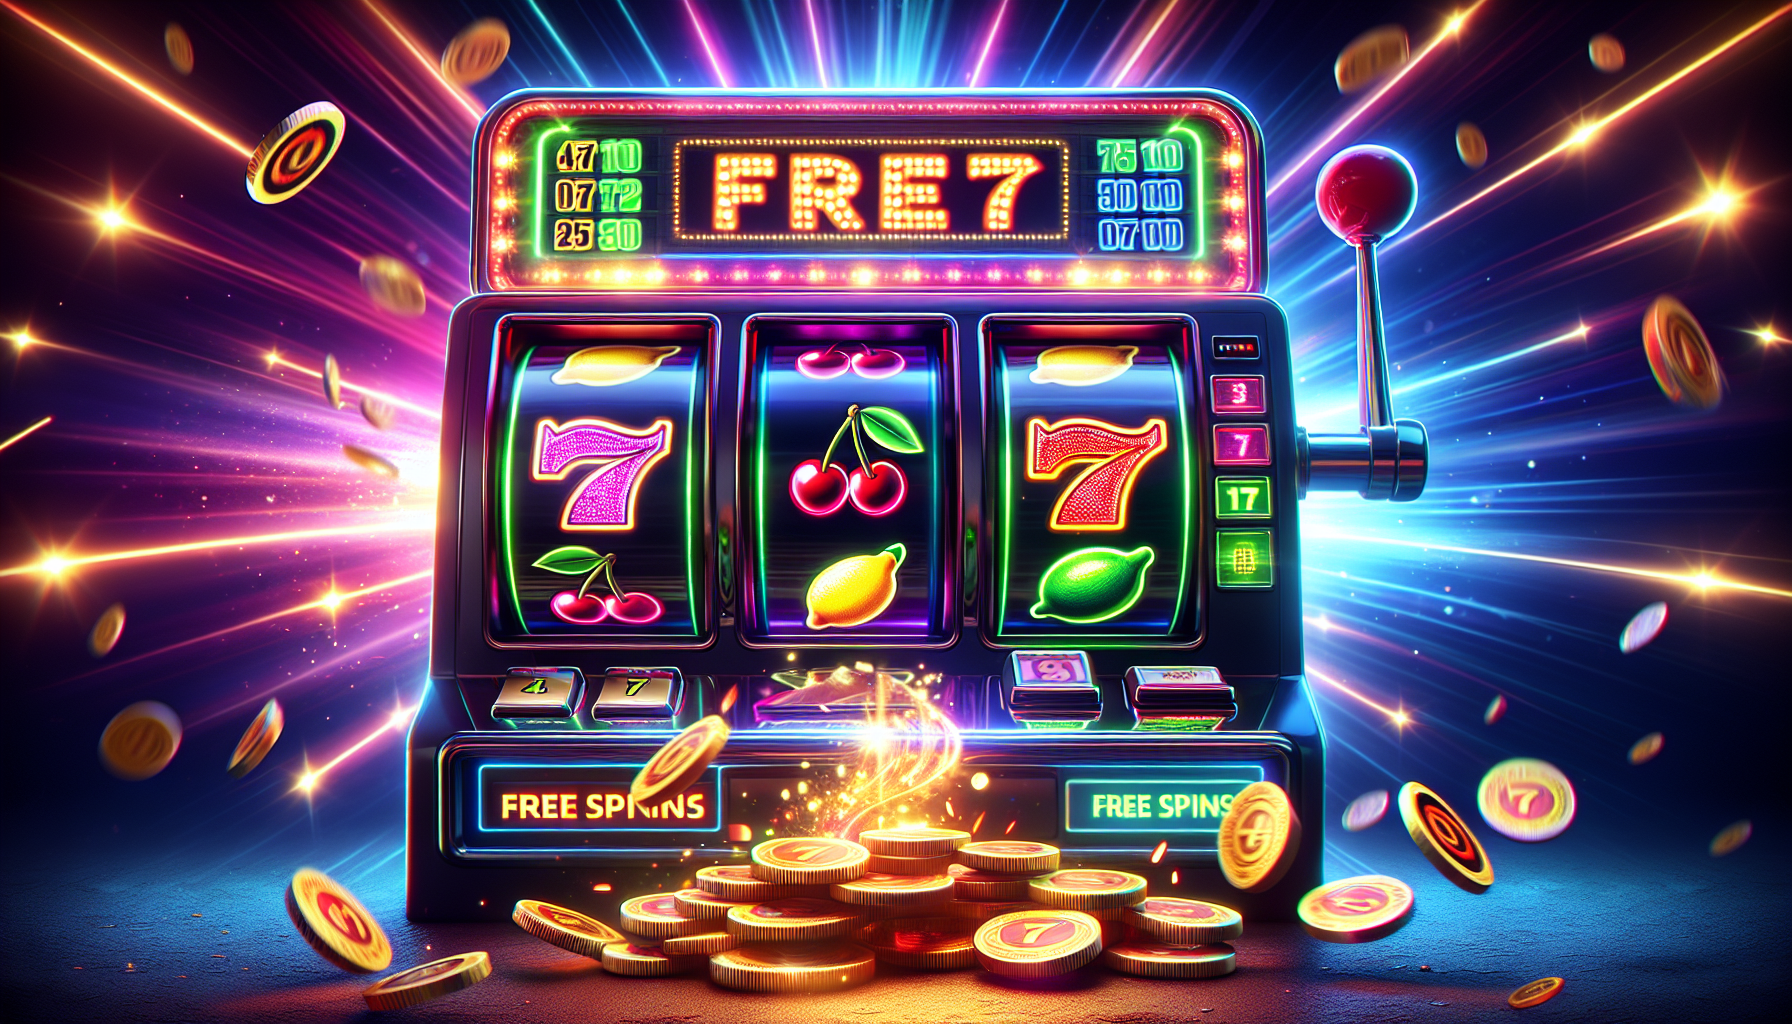 How Do You Trigger Free Spins On Slot Machines?